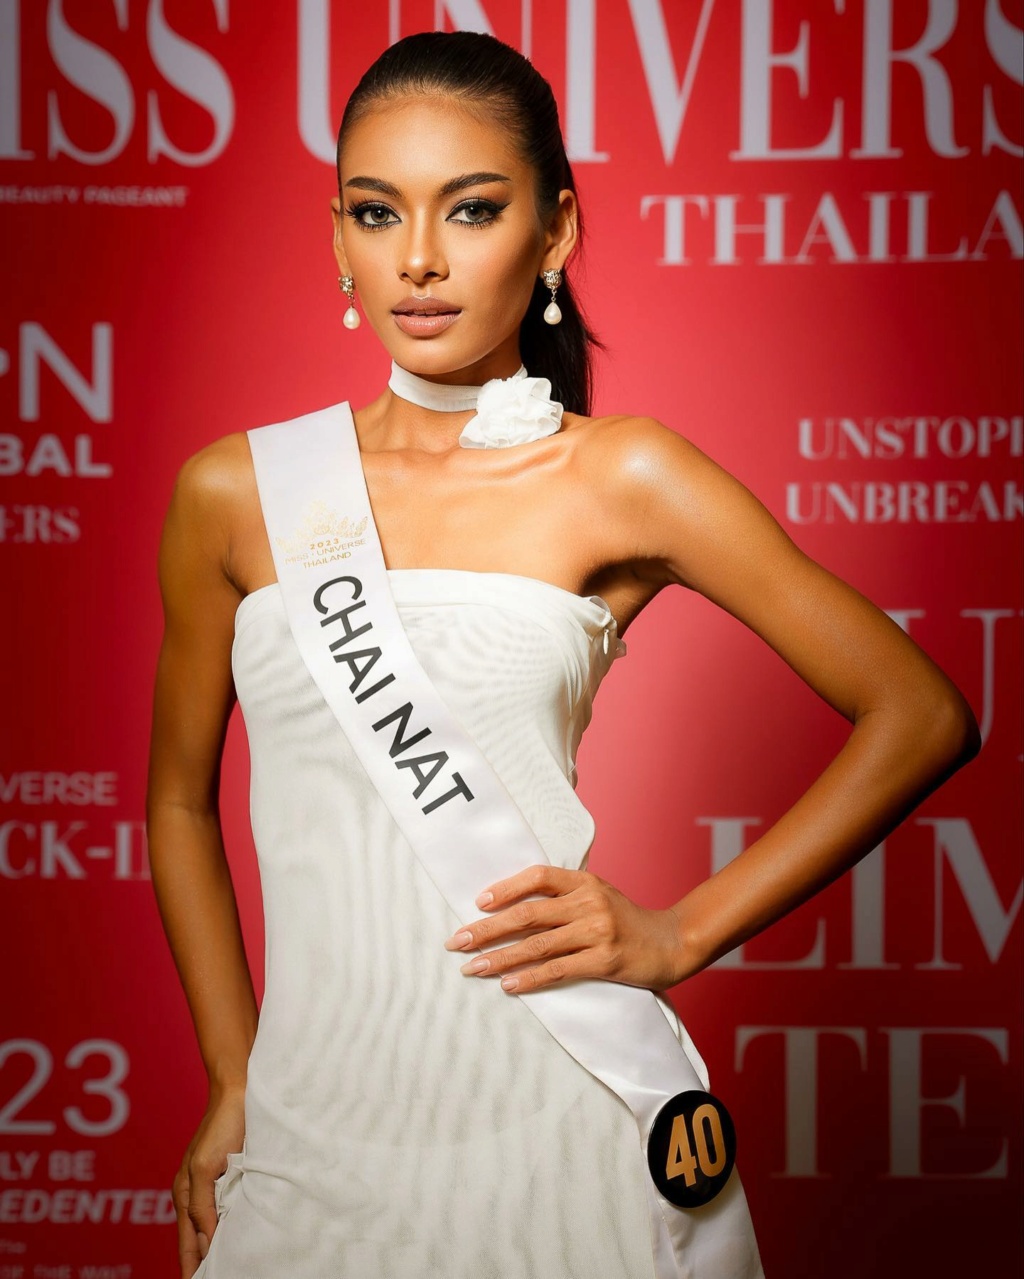 Road to MISS UNIVERSE THAILAND 2023 - Page 6 Ins11382